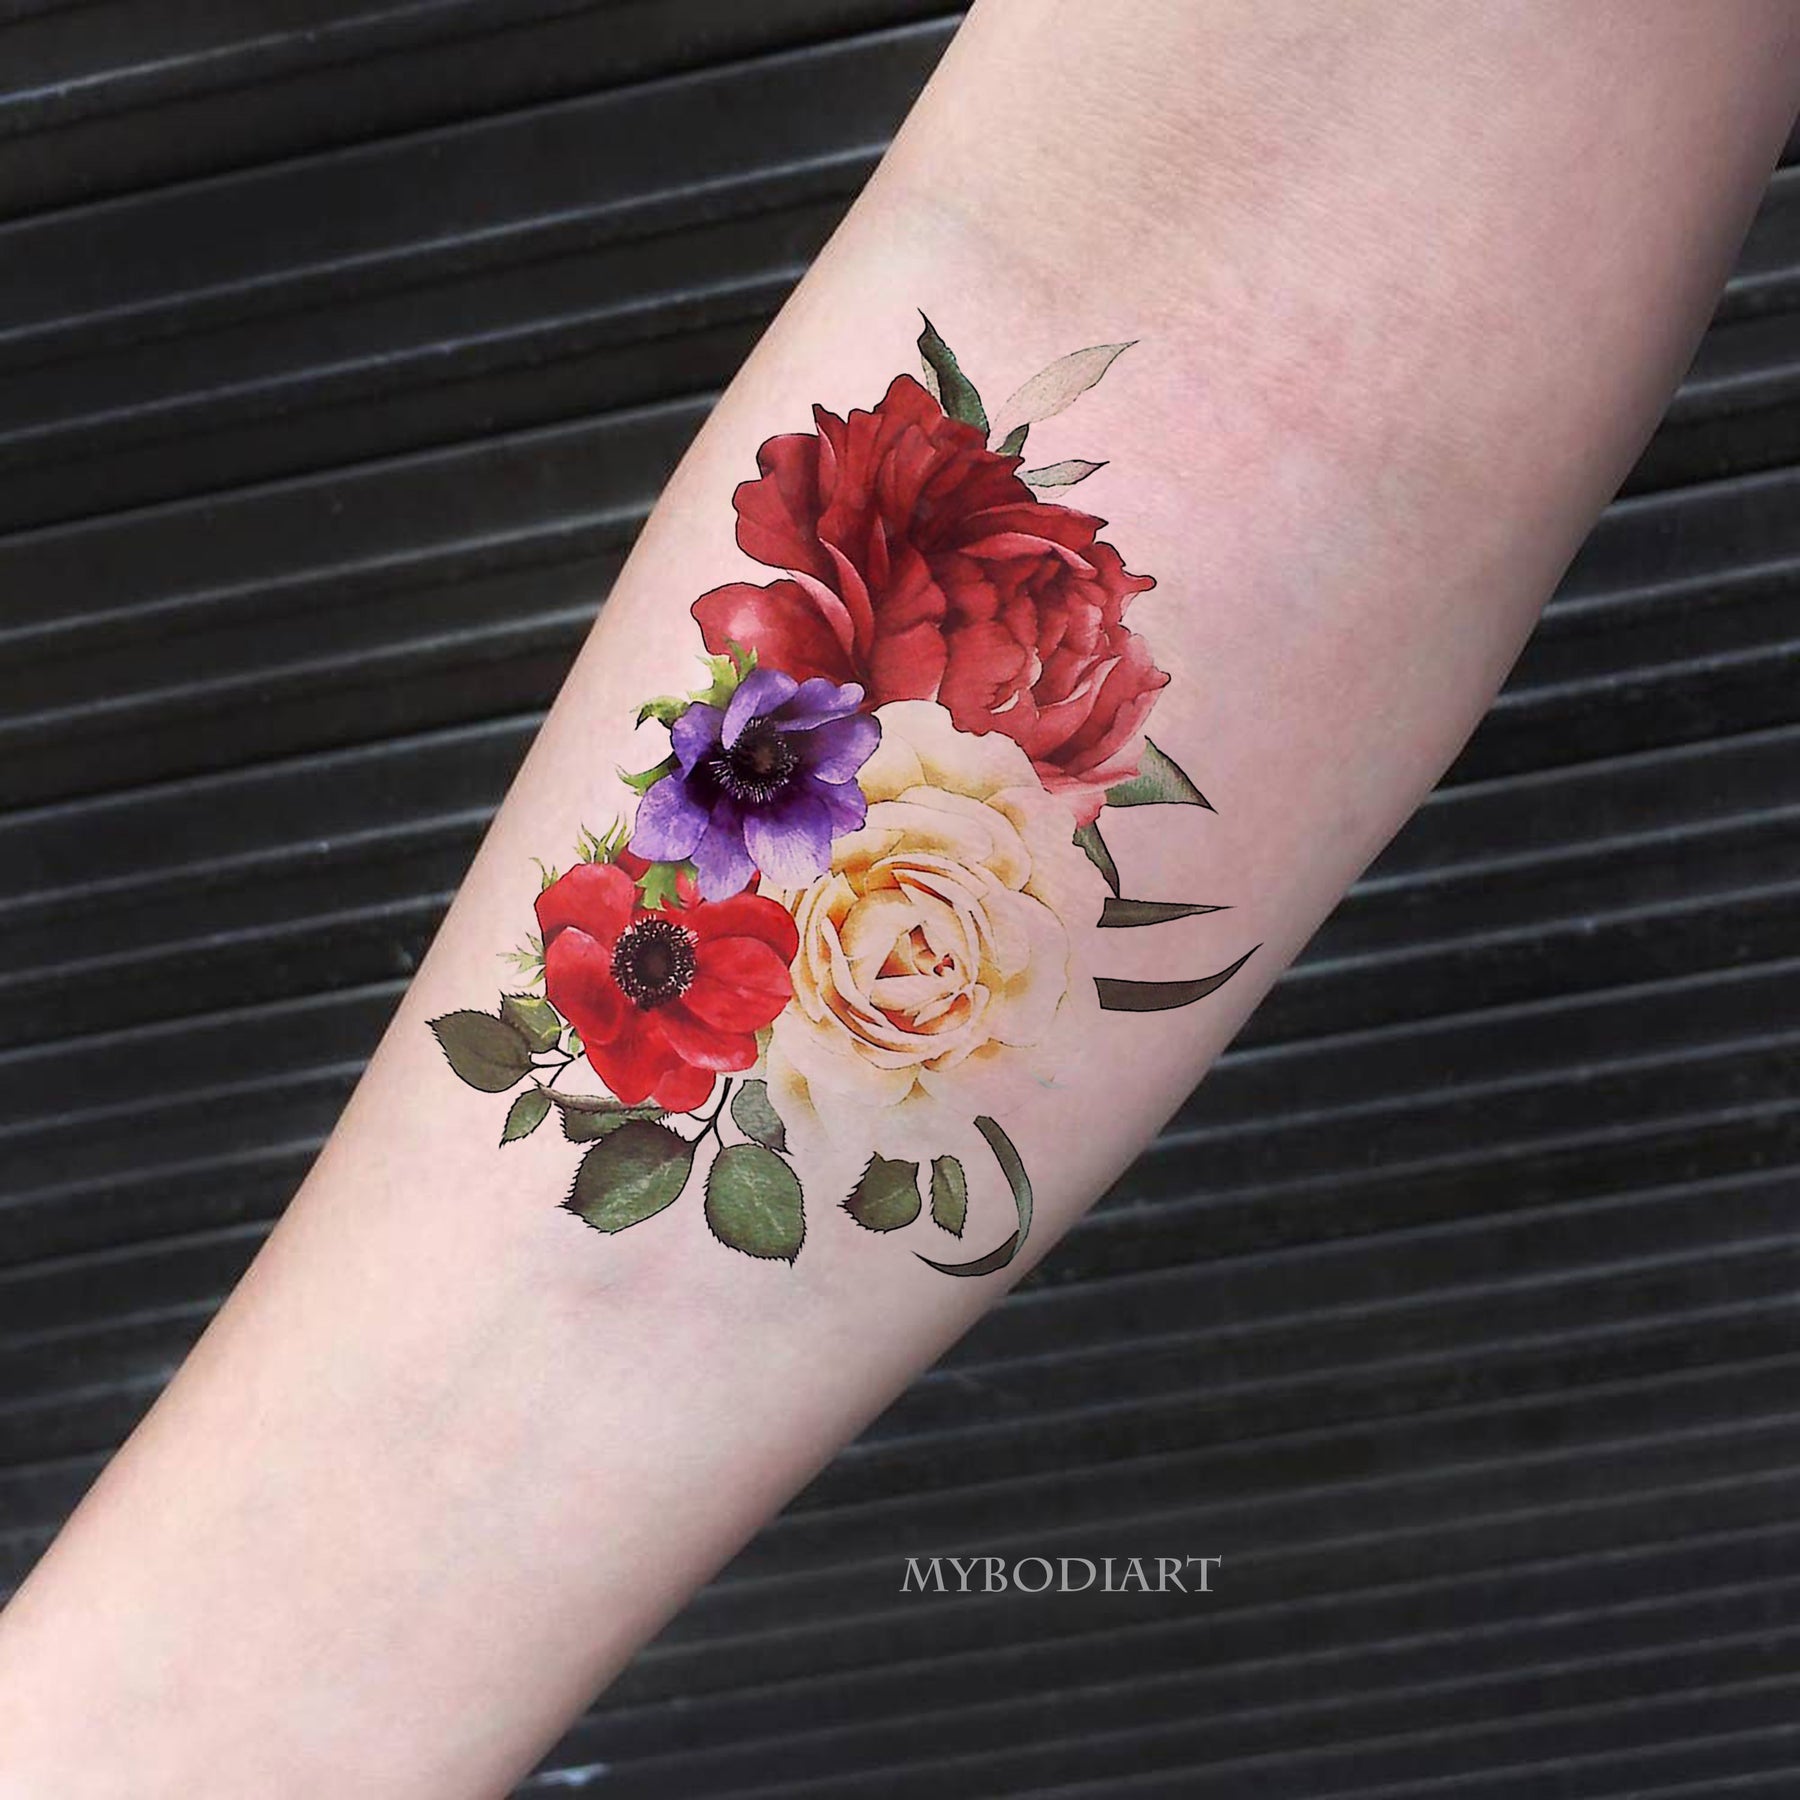 Tattoo uploaded by Saito • #color #realism #red #rose • Tattoodo